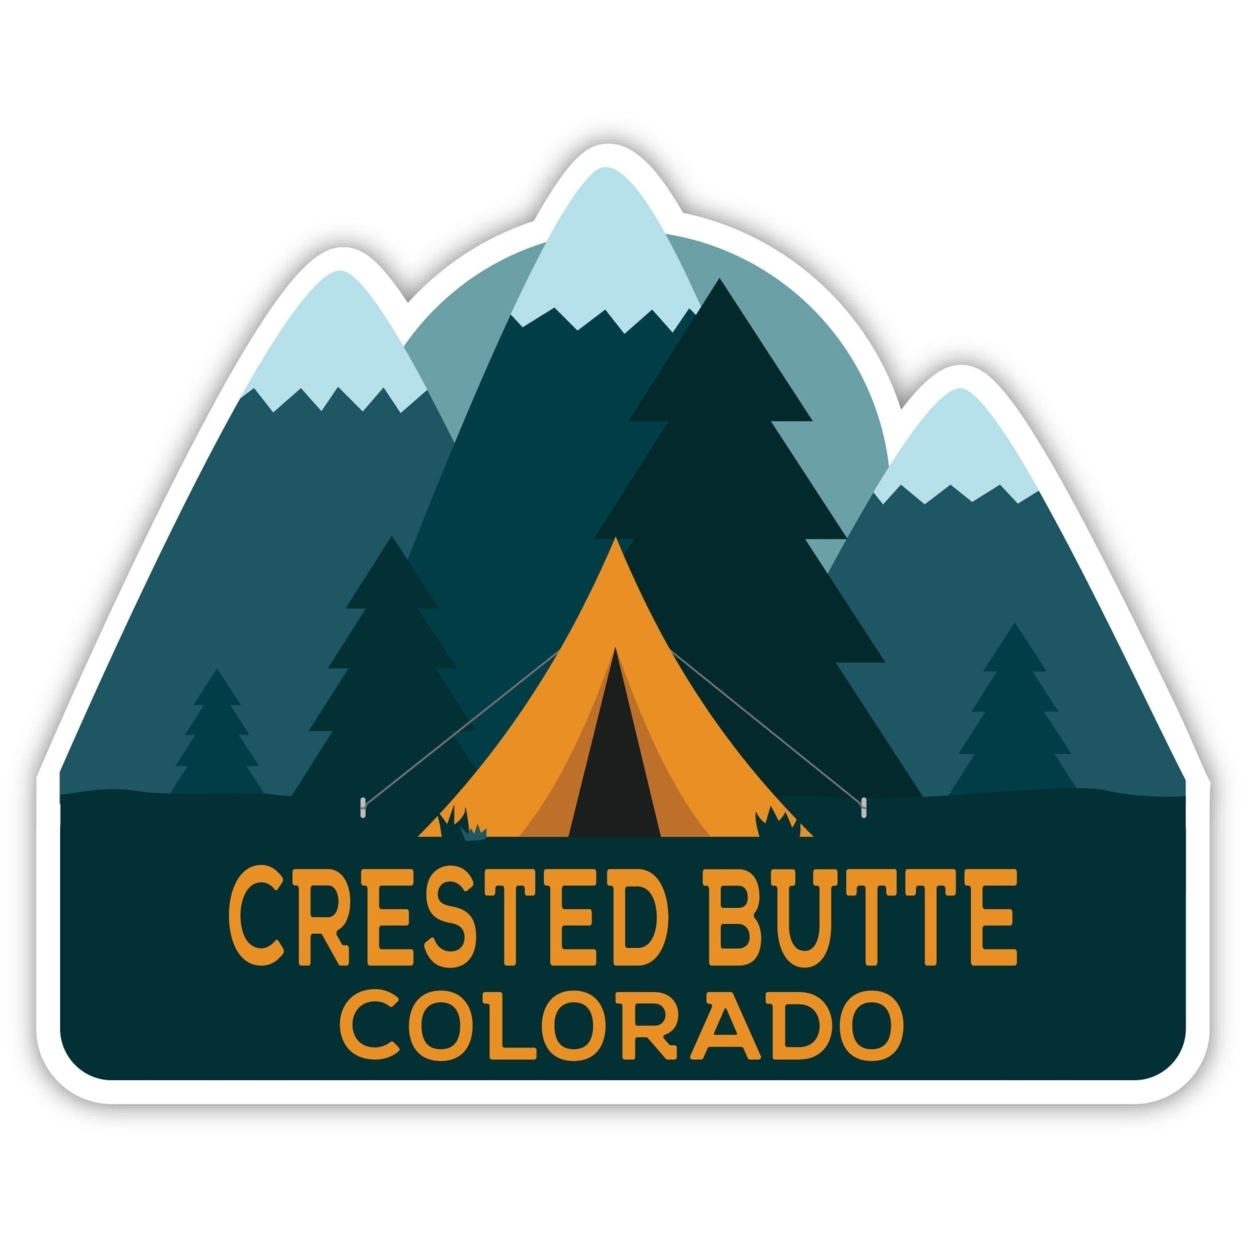 Crested Butte Colorado Souvenir Decorative Stickers (Choose Theme And Size) - 4-Pack, 6-Inch, Camp Life